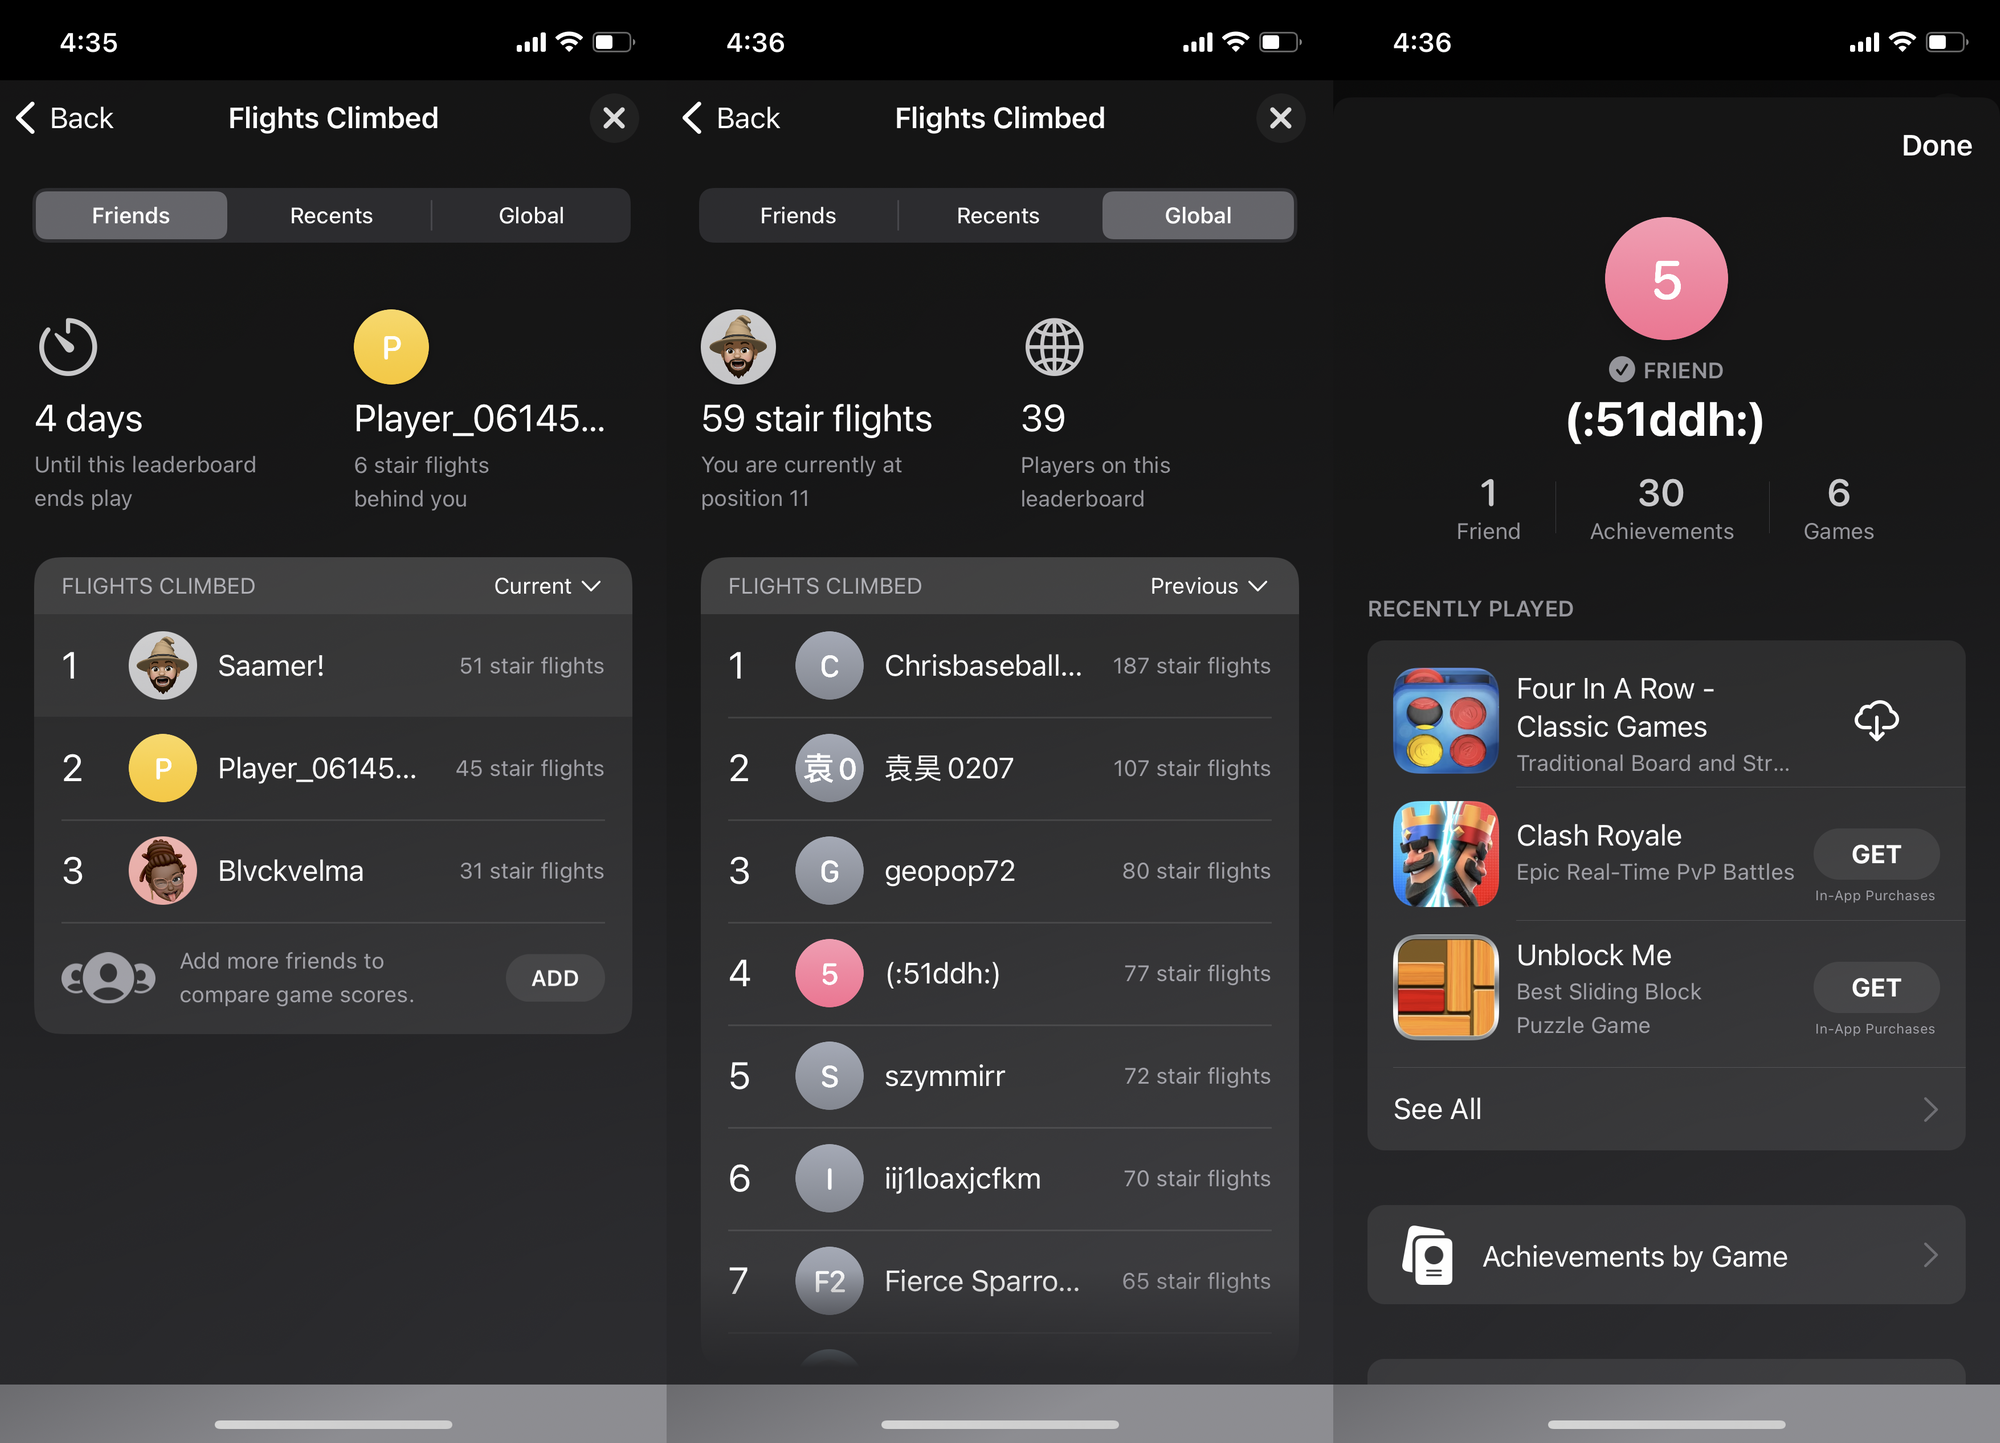 Match-based app Leaderboard launched in New York on Apple